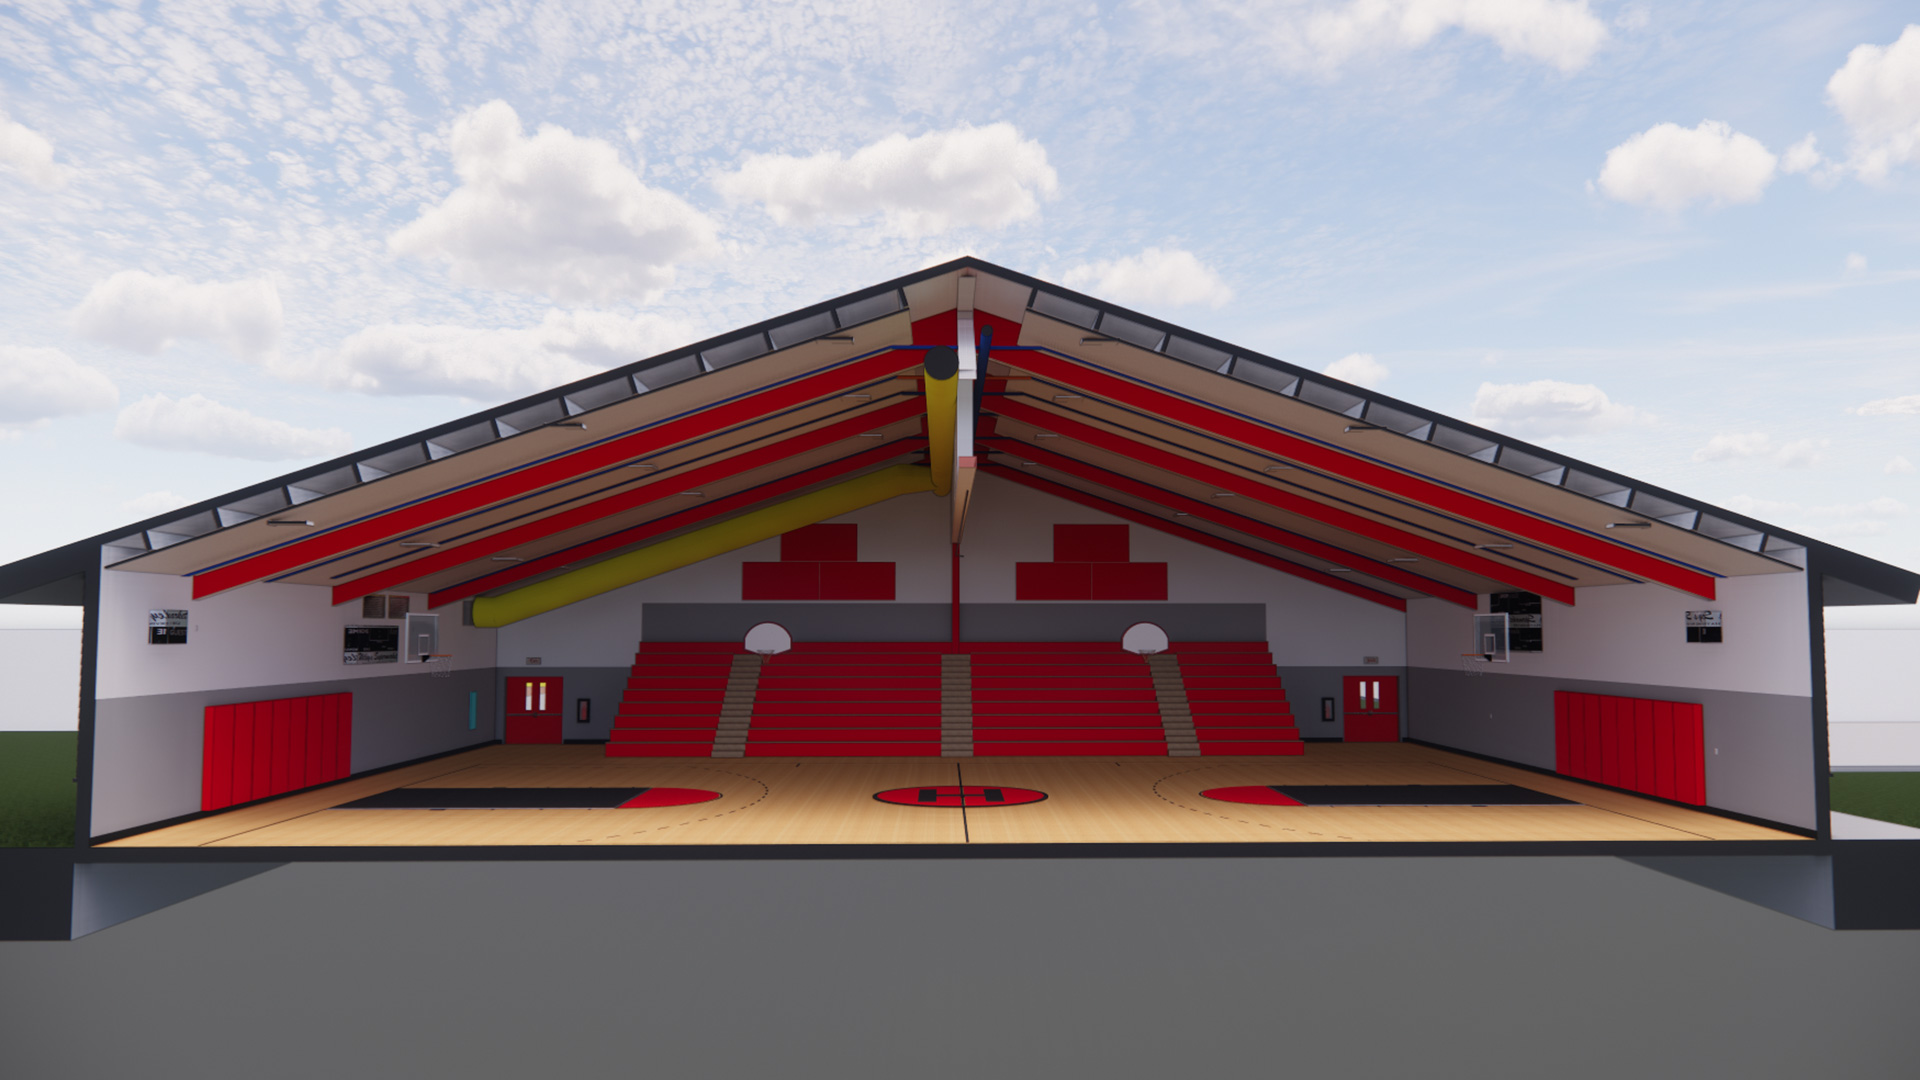 Rendering of new gym interior, with red bleachers and roof supports, and basketball court.